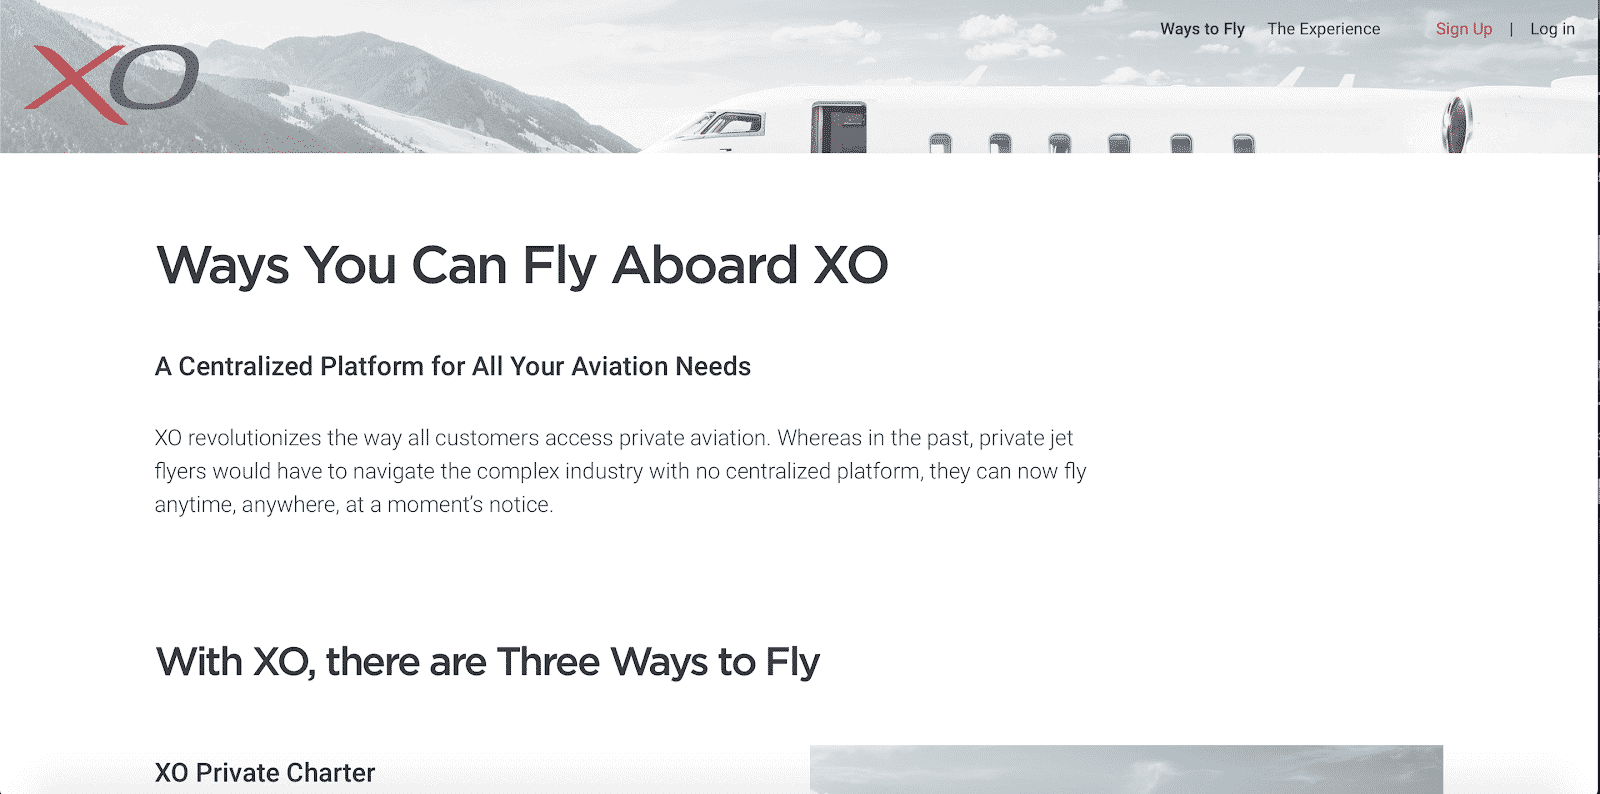 The XOJET ways to fly website